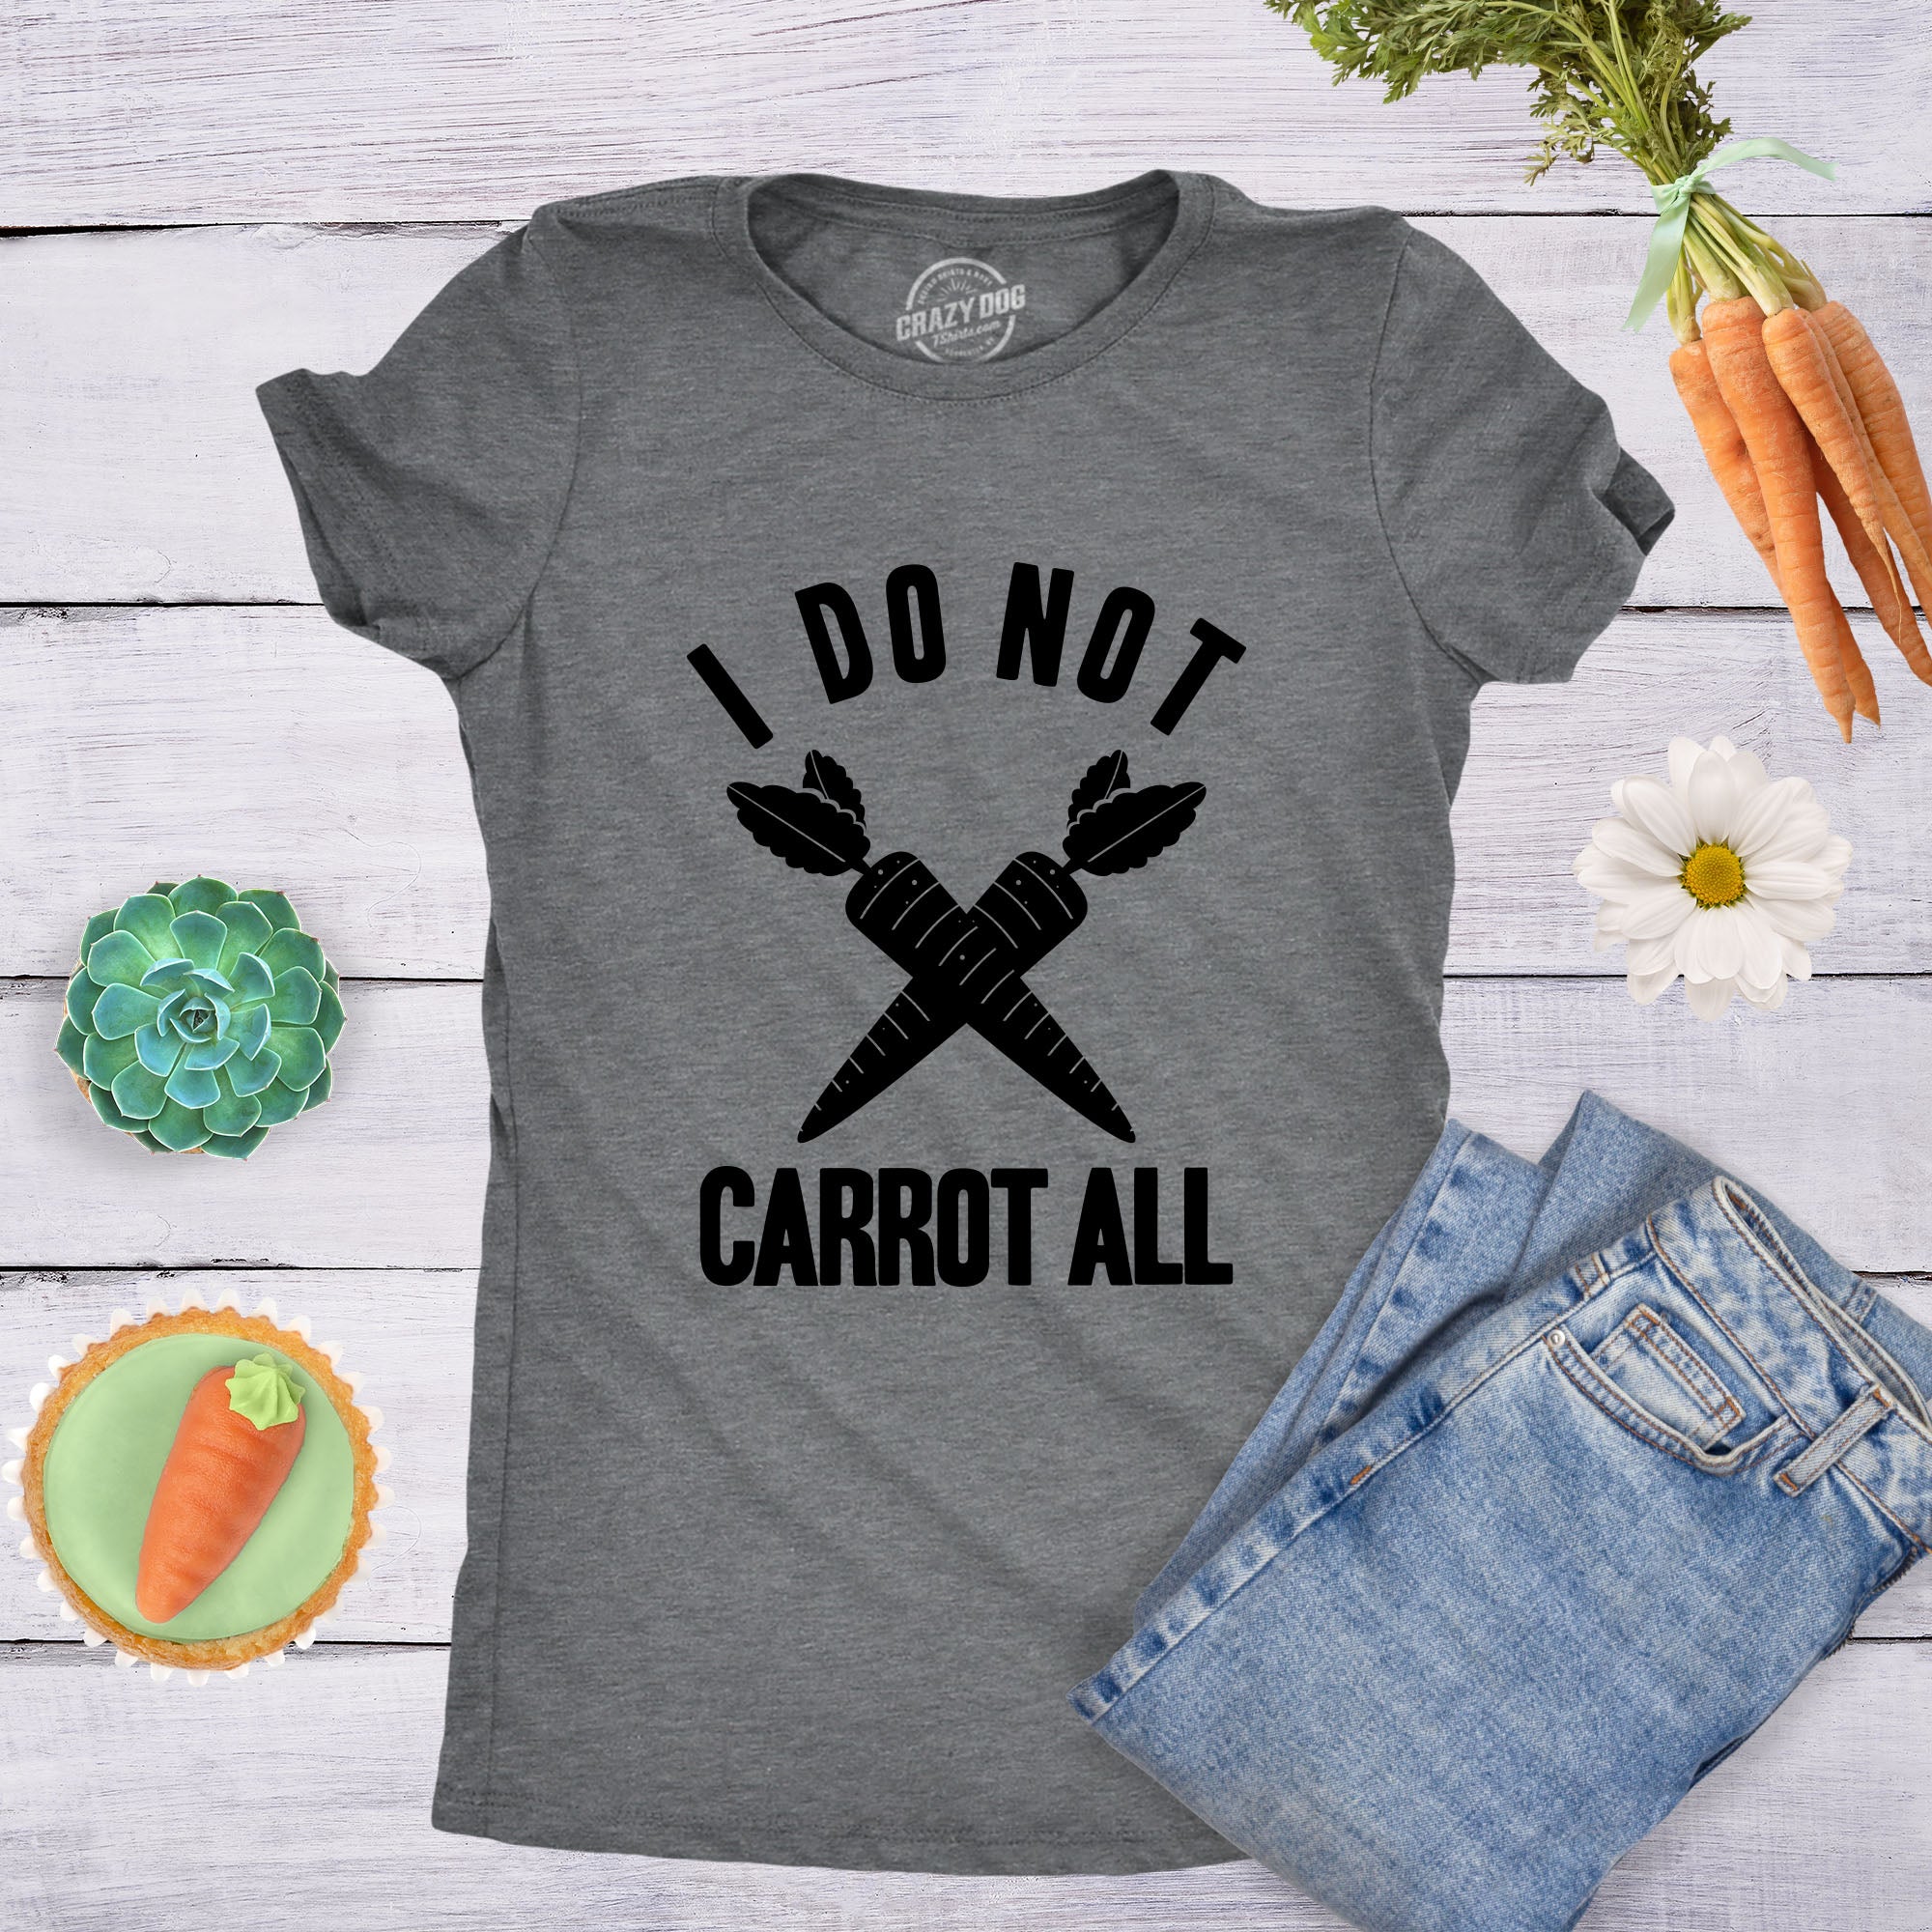 Funny Light Heather Grey - Do Not Carrot I Do Not Carrot All Womens T Shirt Nerdy Easter Sarcastic Tee